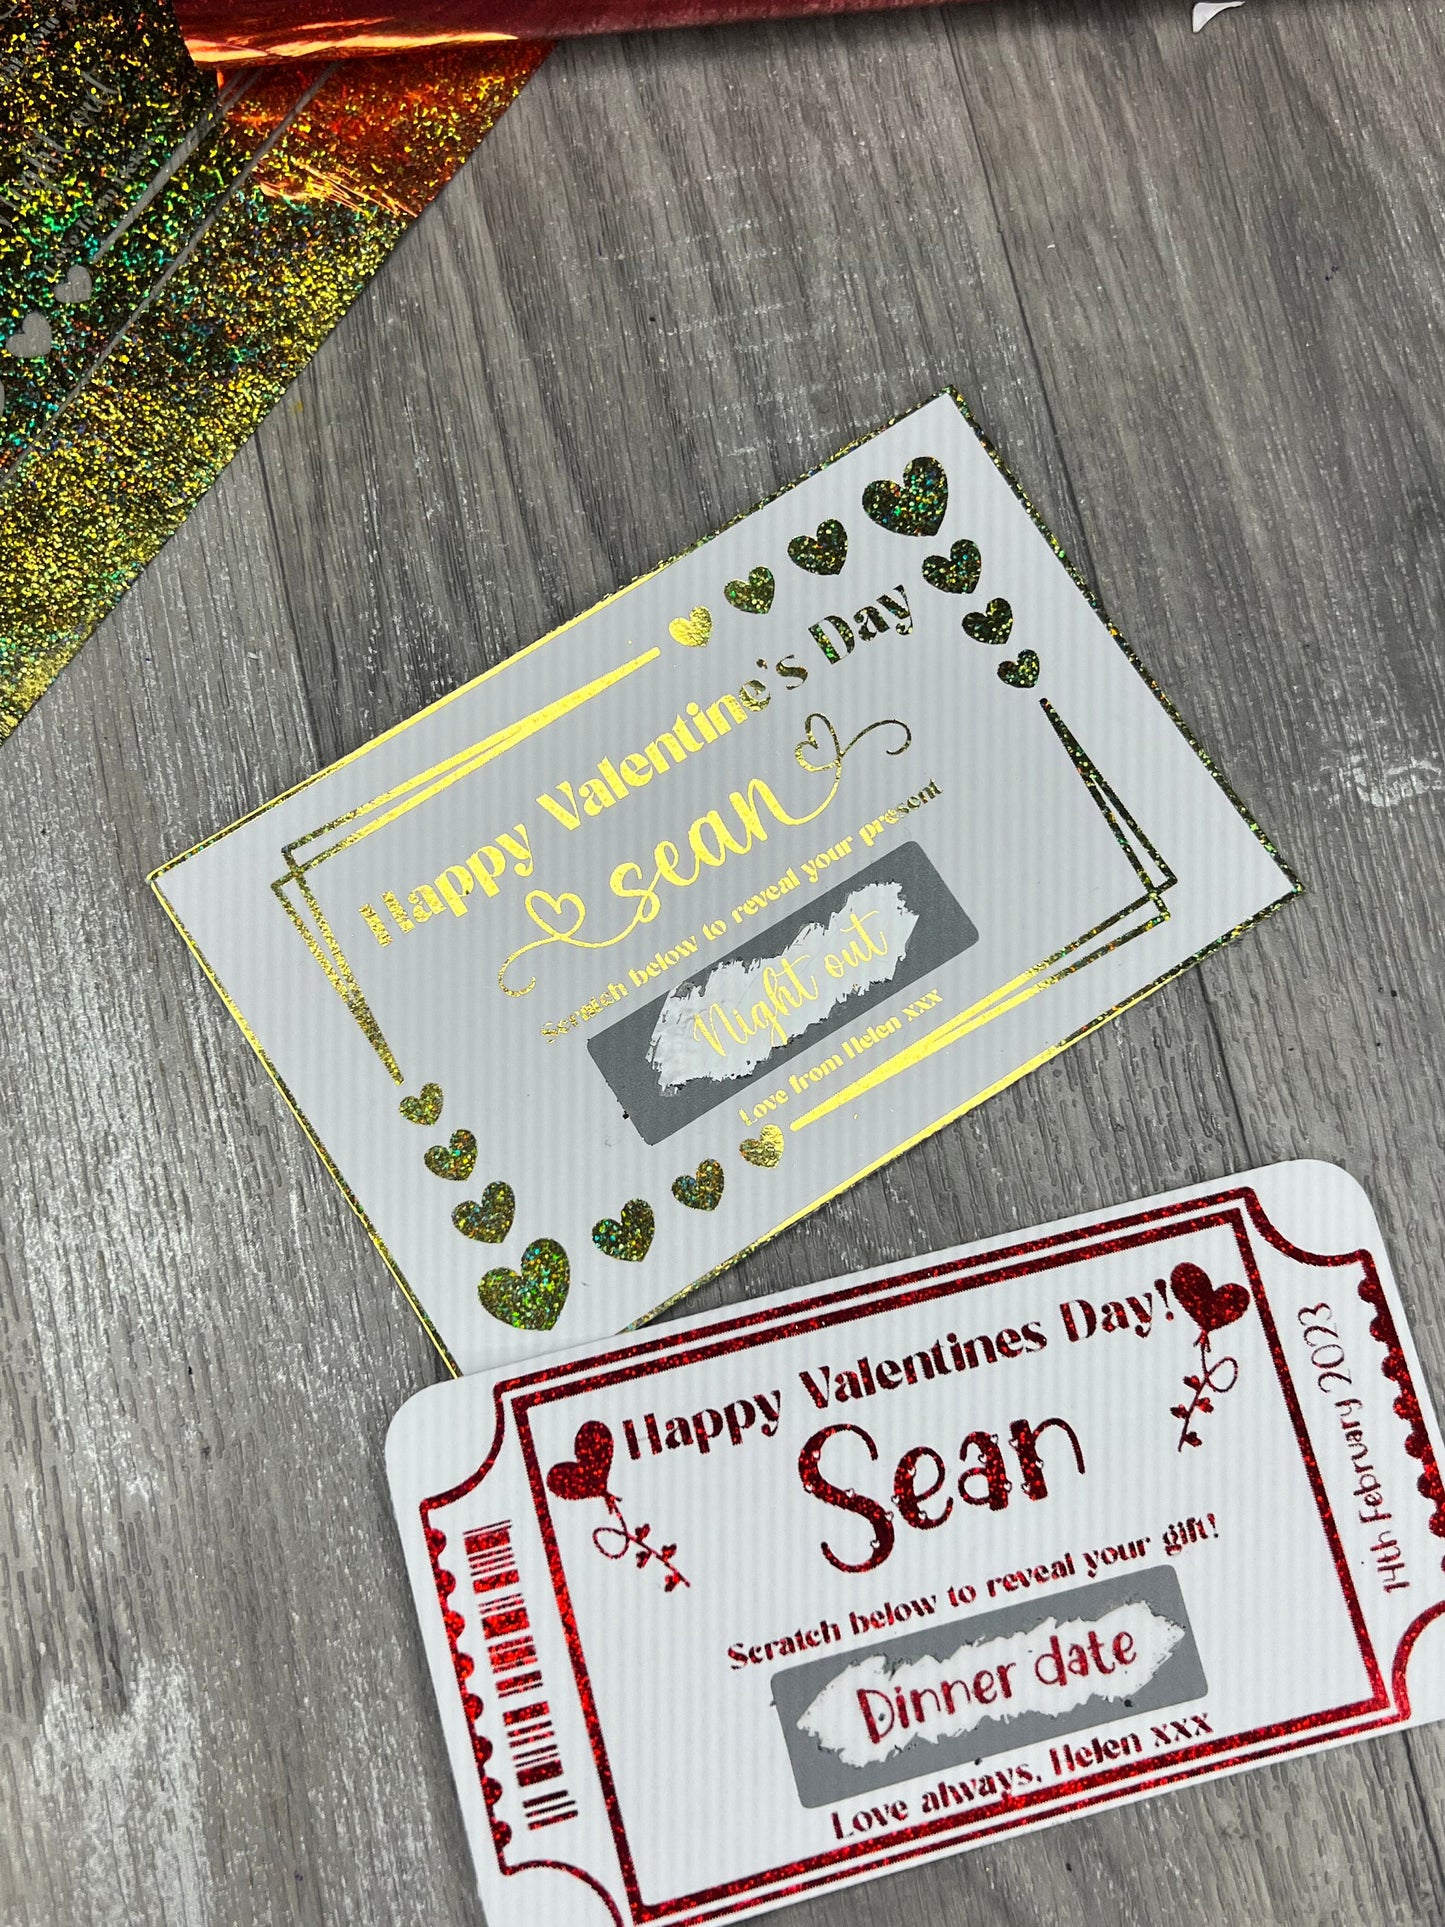 Valentine’s Day gifting scratch card